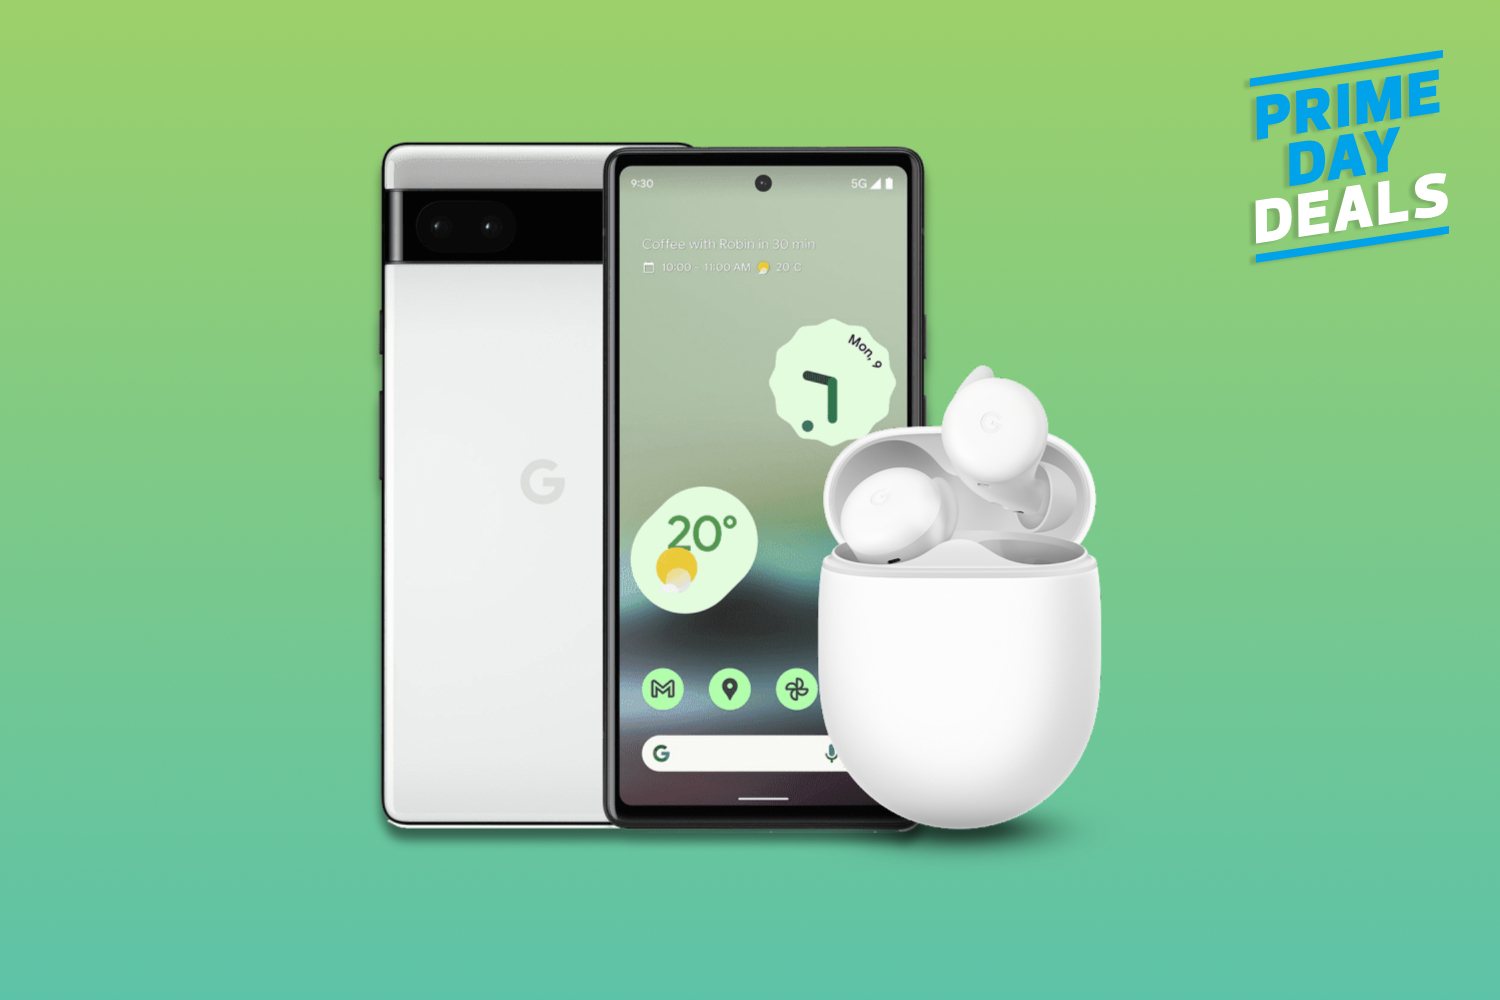 Grab a discounted Pixel 6a with free Pixel Buds during the Prime